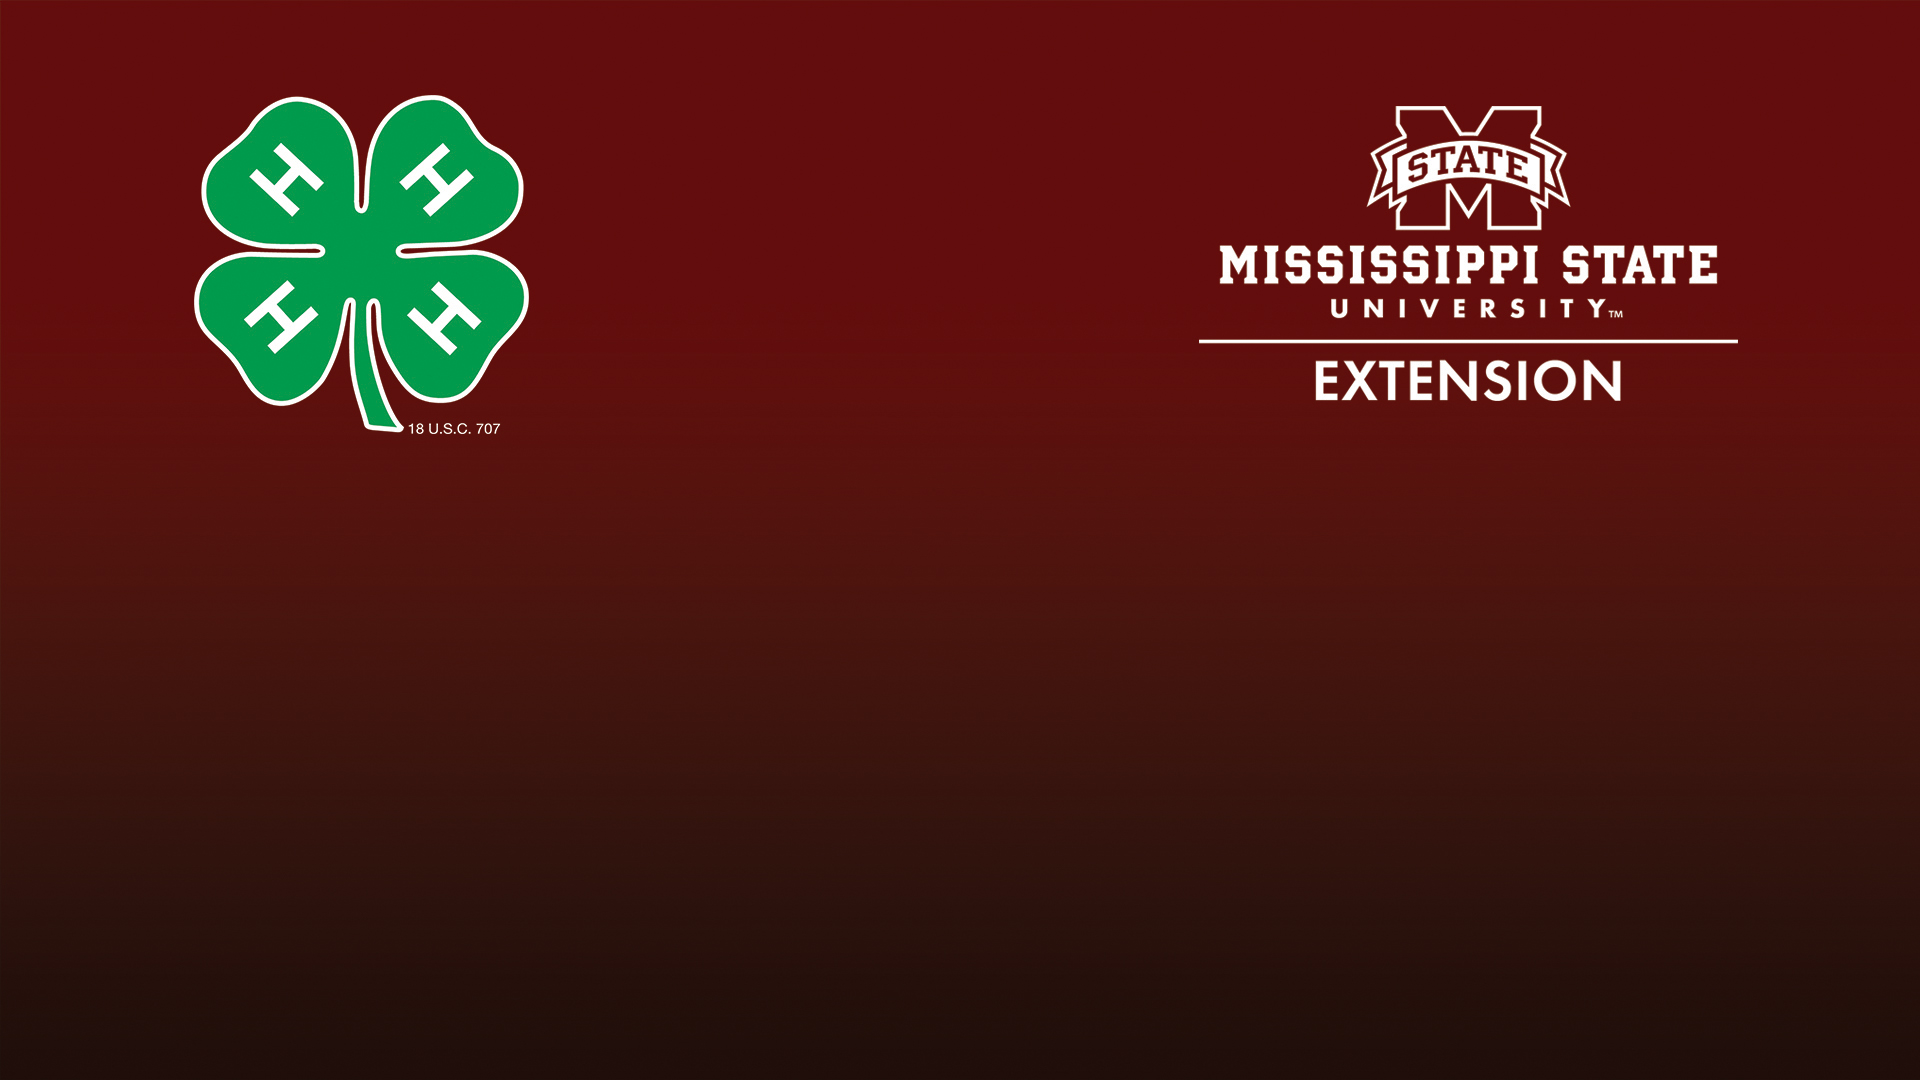 Maroon gradient background with 4-H and Extension logos.